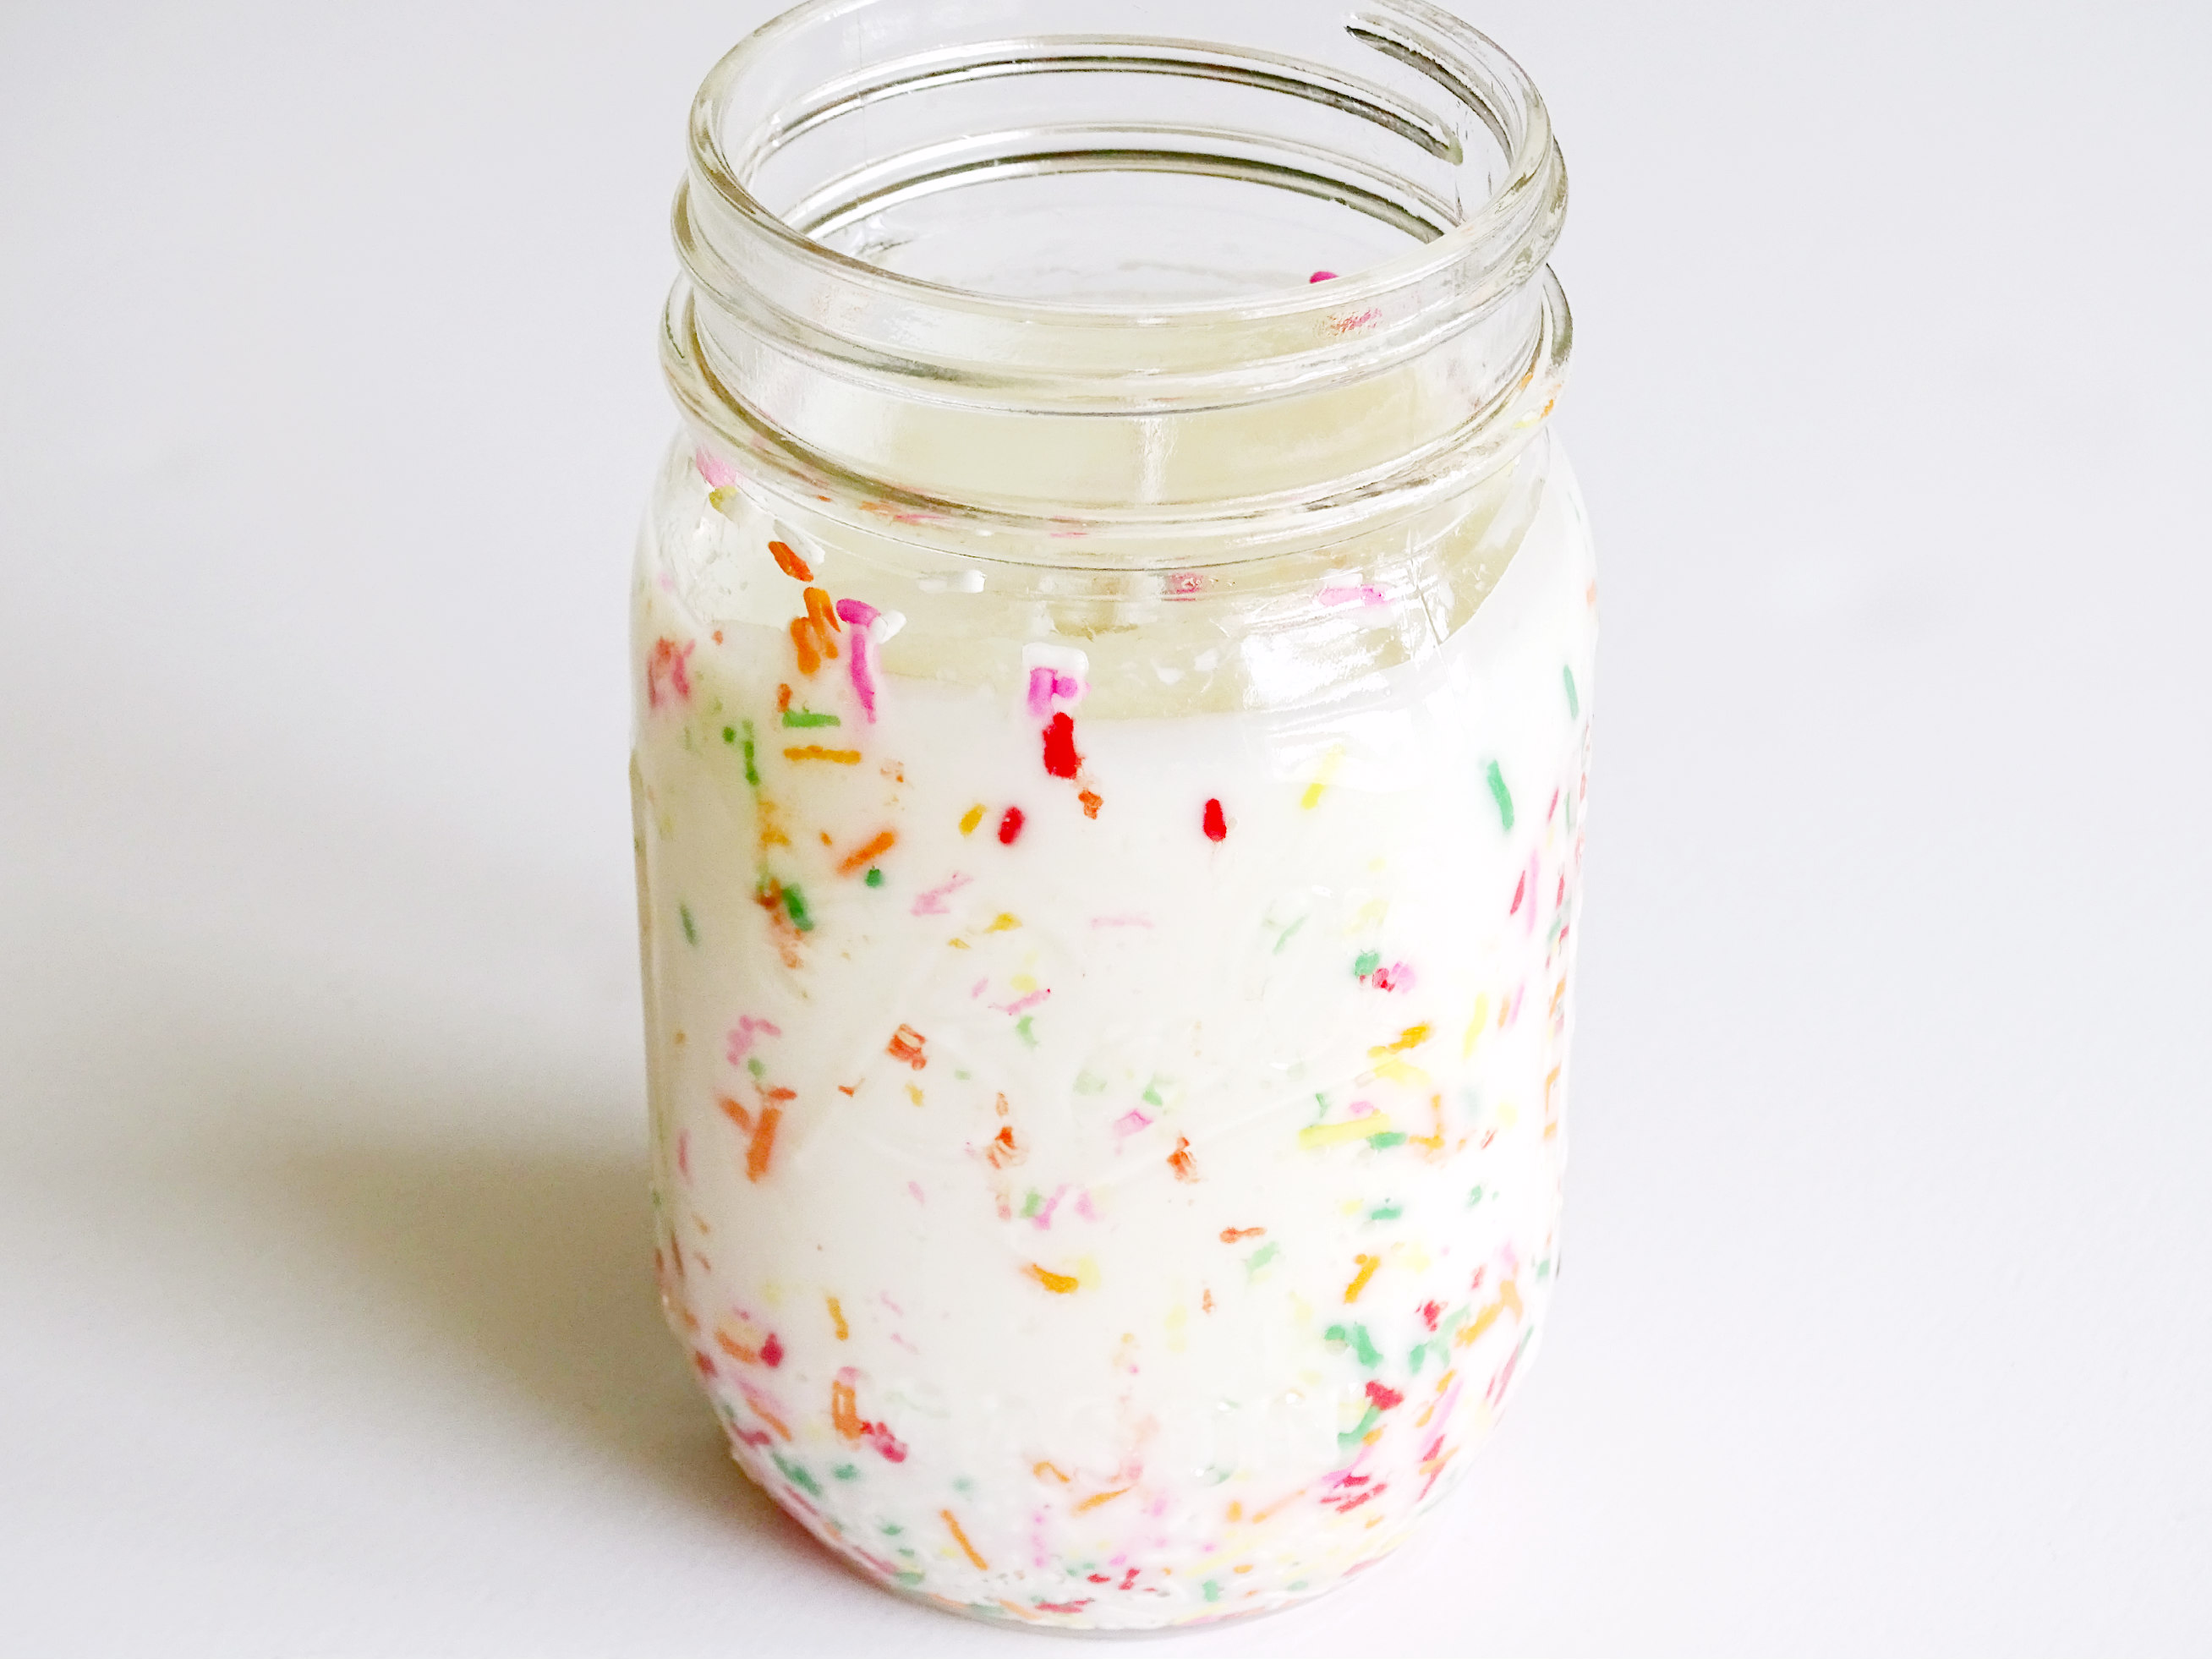 DIY Party Cake Candle